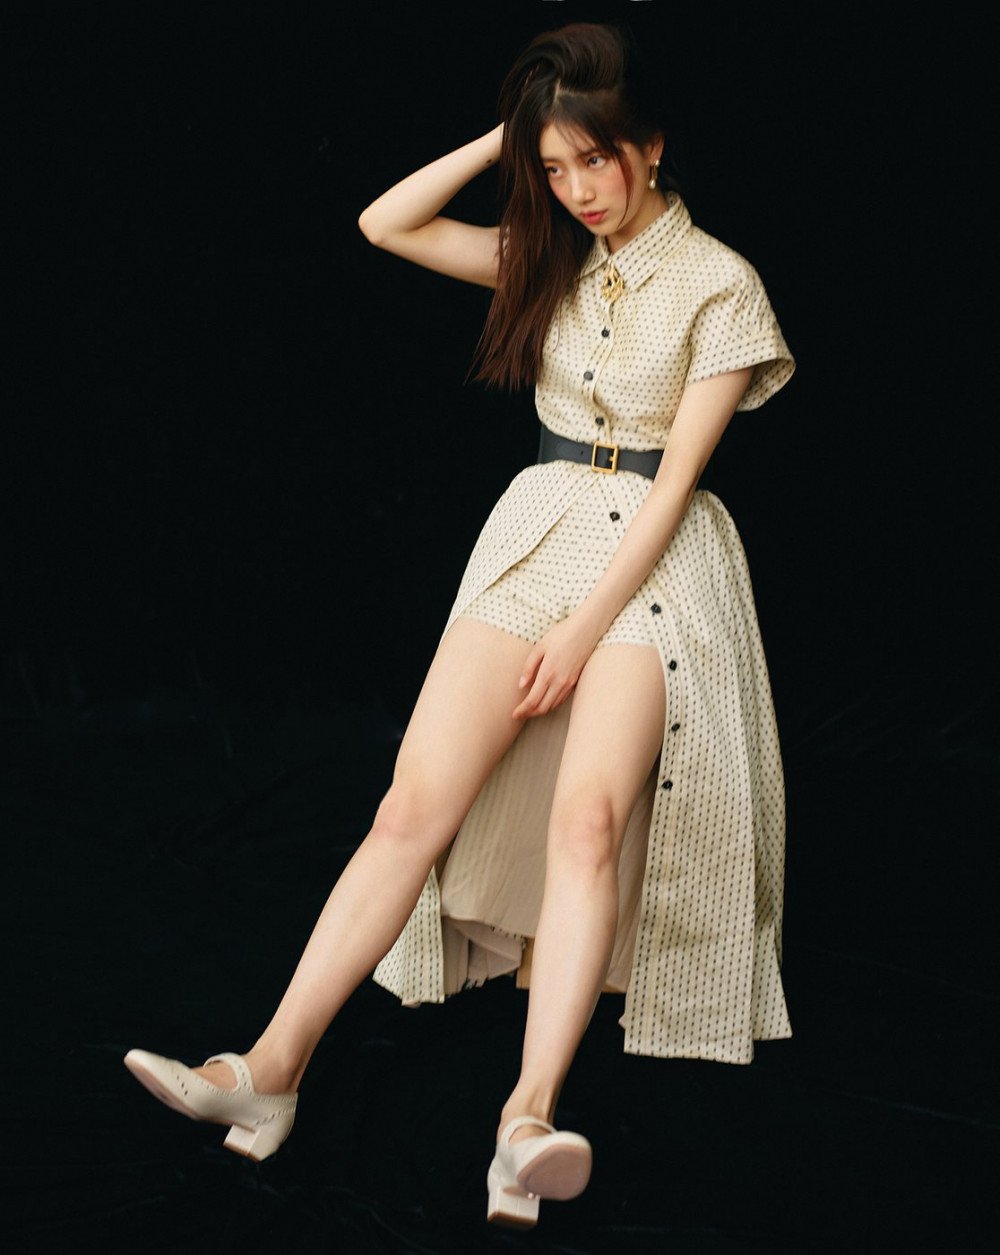 suzy-turns-into-fashion-icon-in-vogue-7